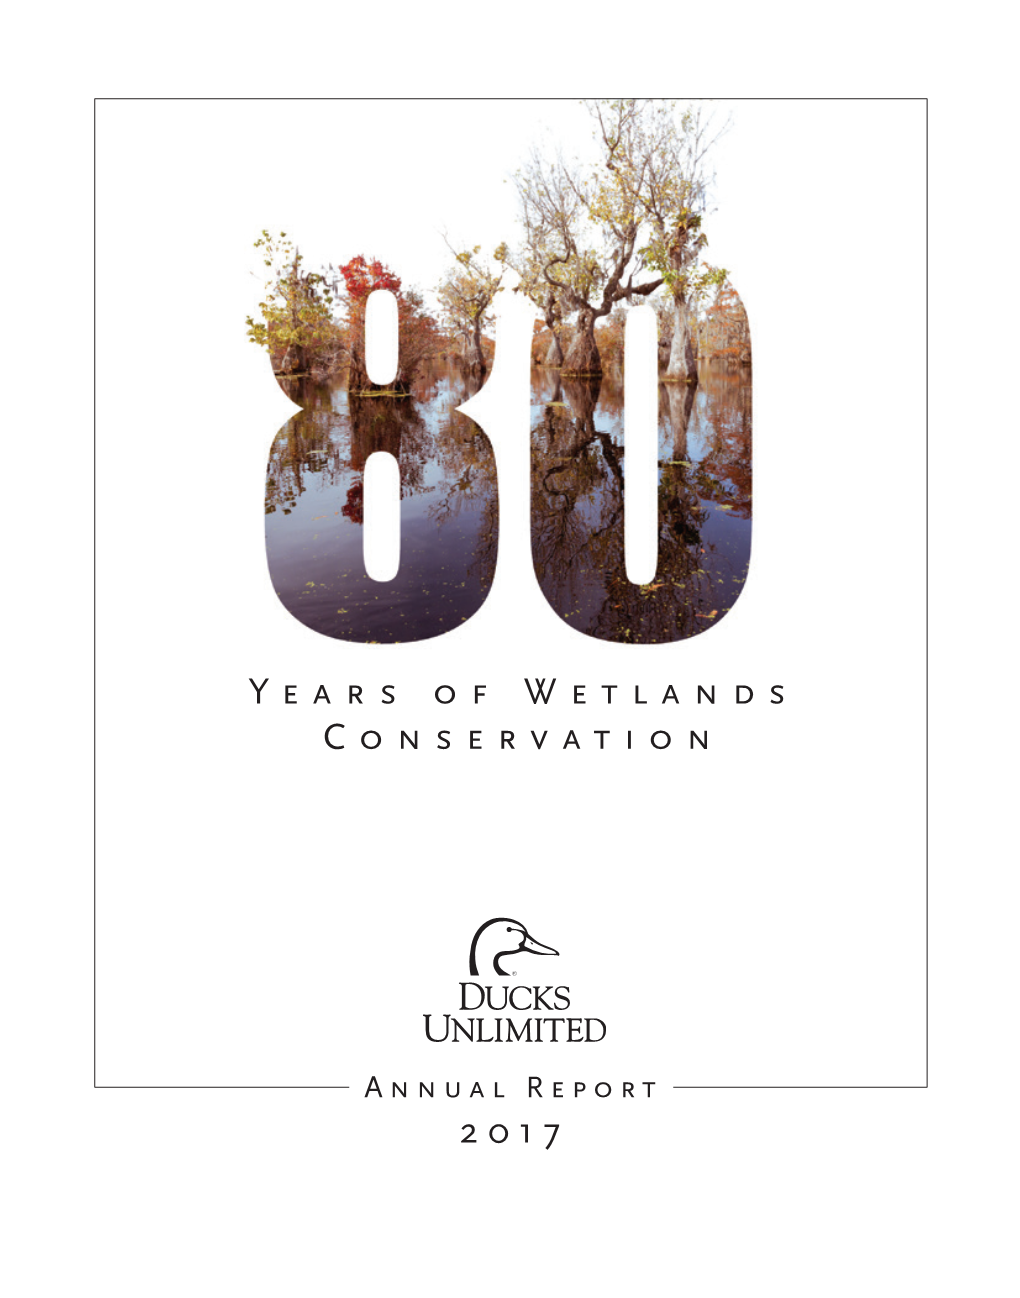 Years of Wetlands Conservation 2017